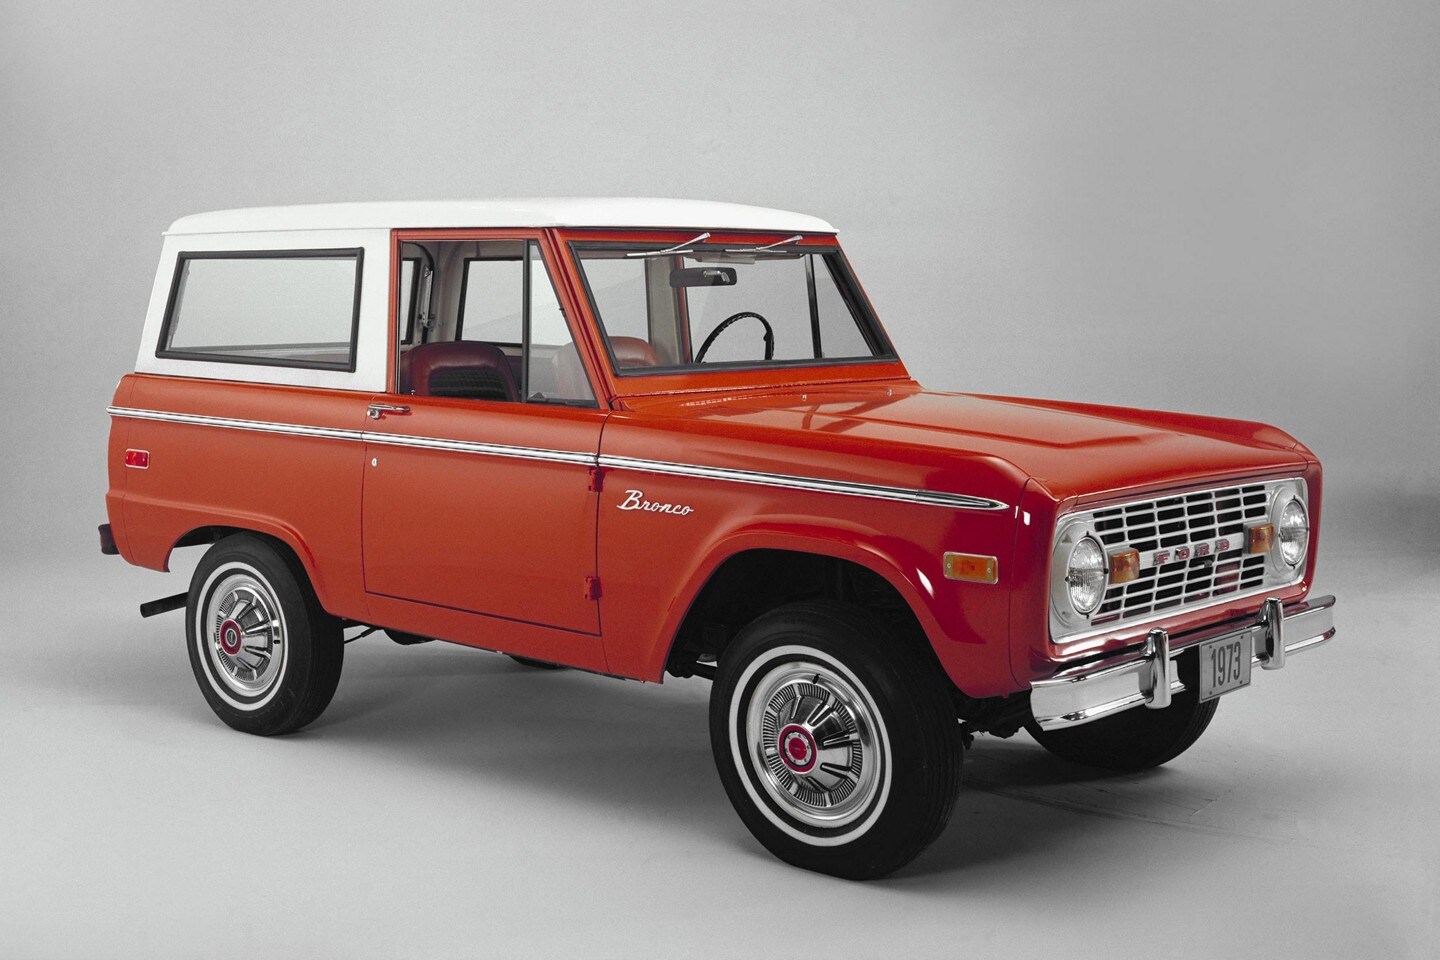 1973 Ford Bronco Wagon with full length roof and upper body sides 